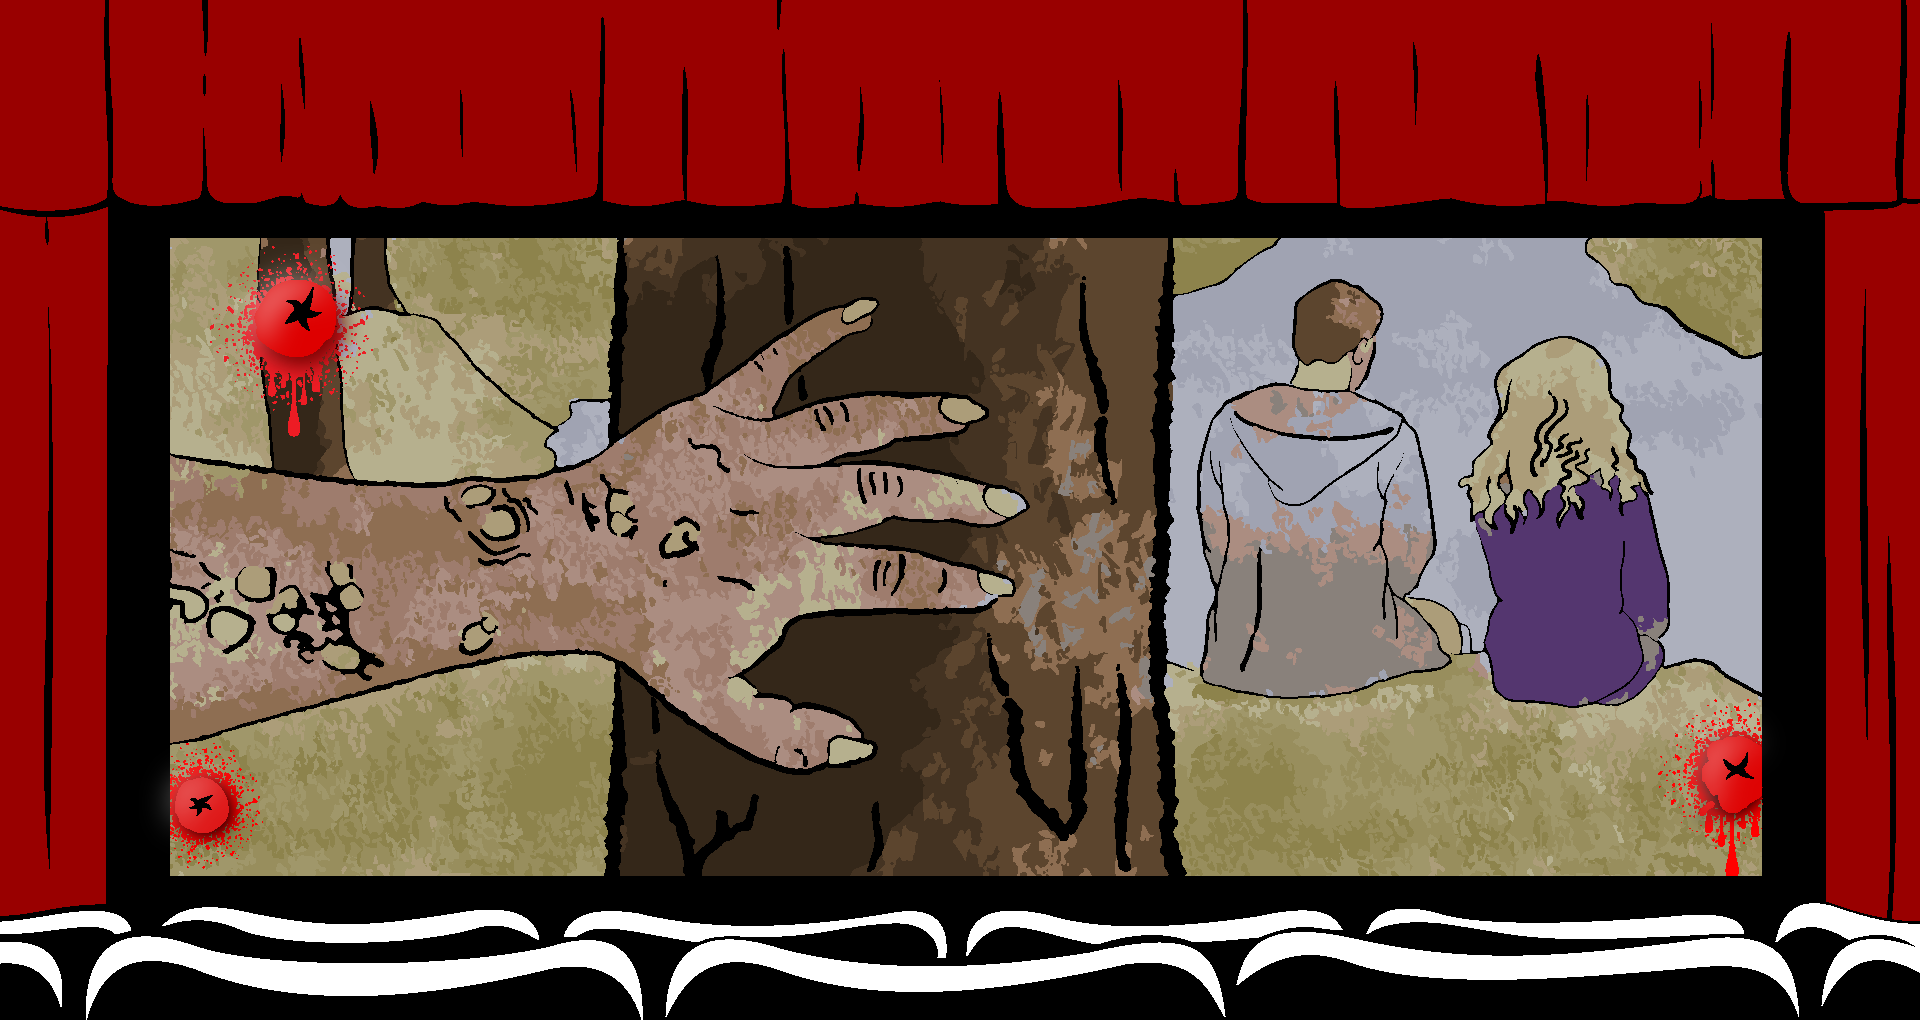 movie theatre graphic with scene from no body sleeps in the woods tonight